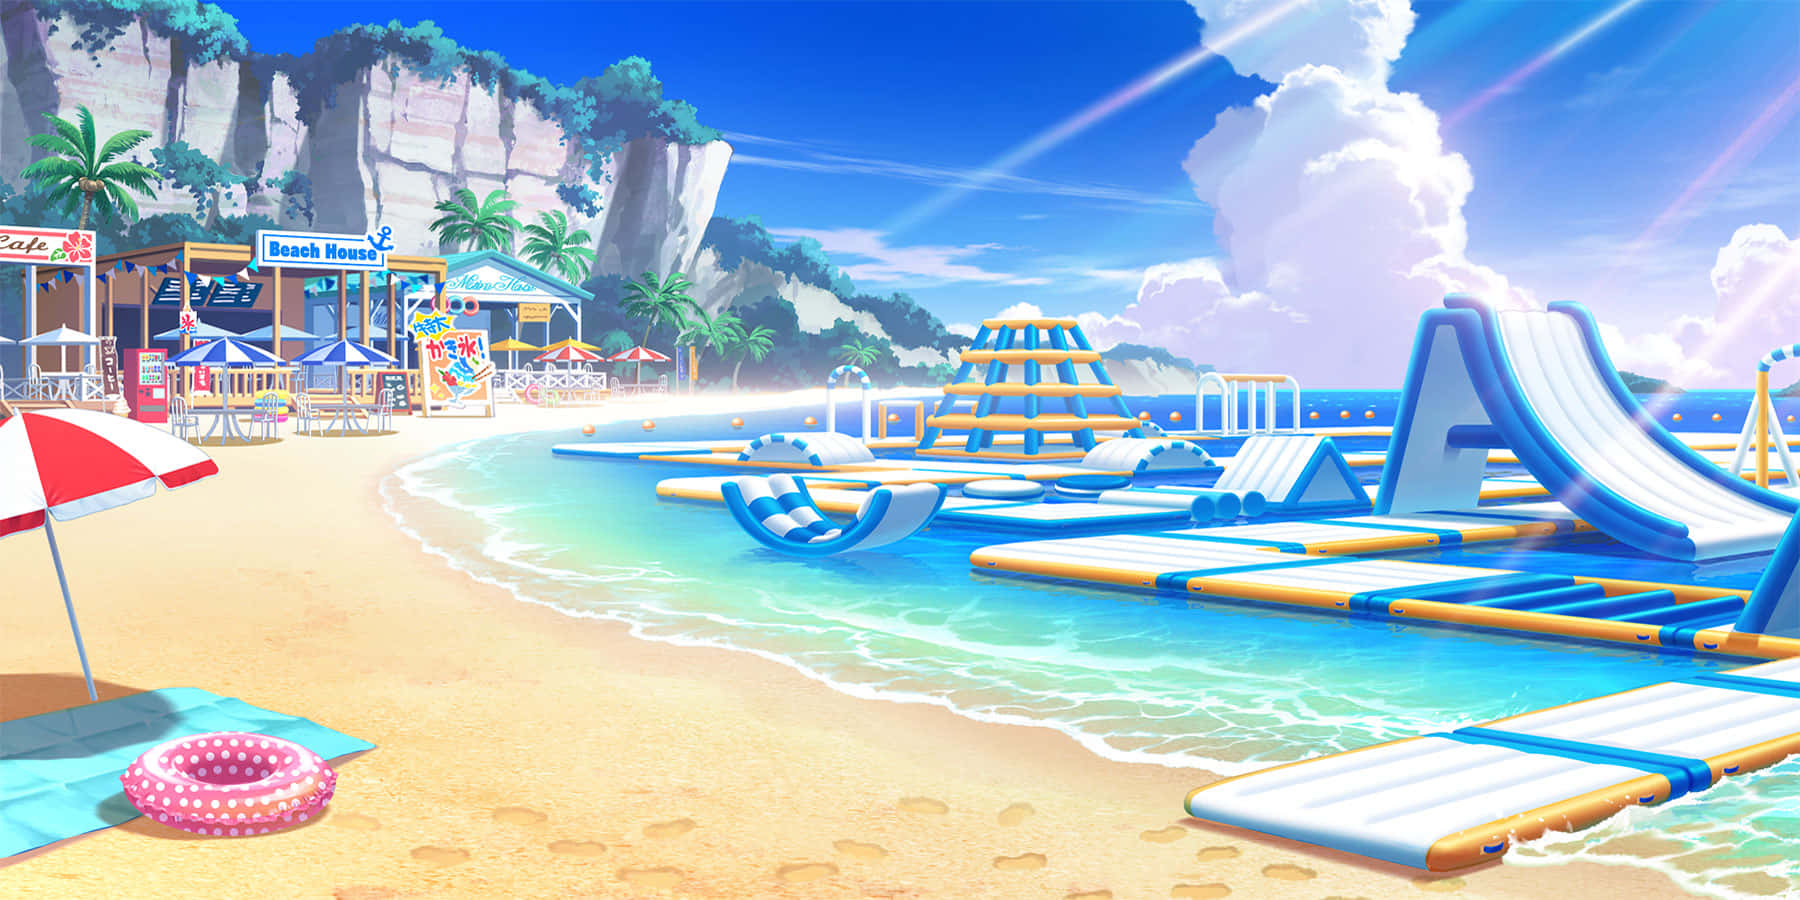 Page 3 | Beach Anime Backgrounds Images - Free Download on Freepik